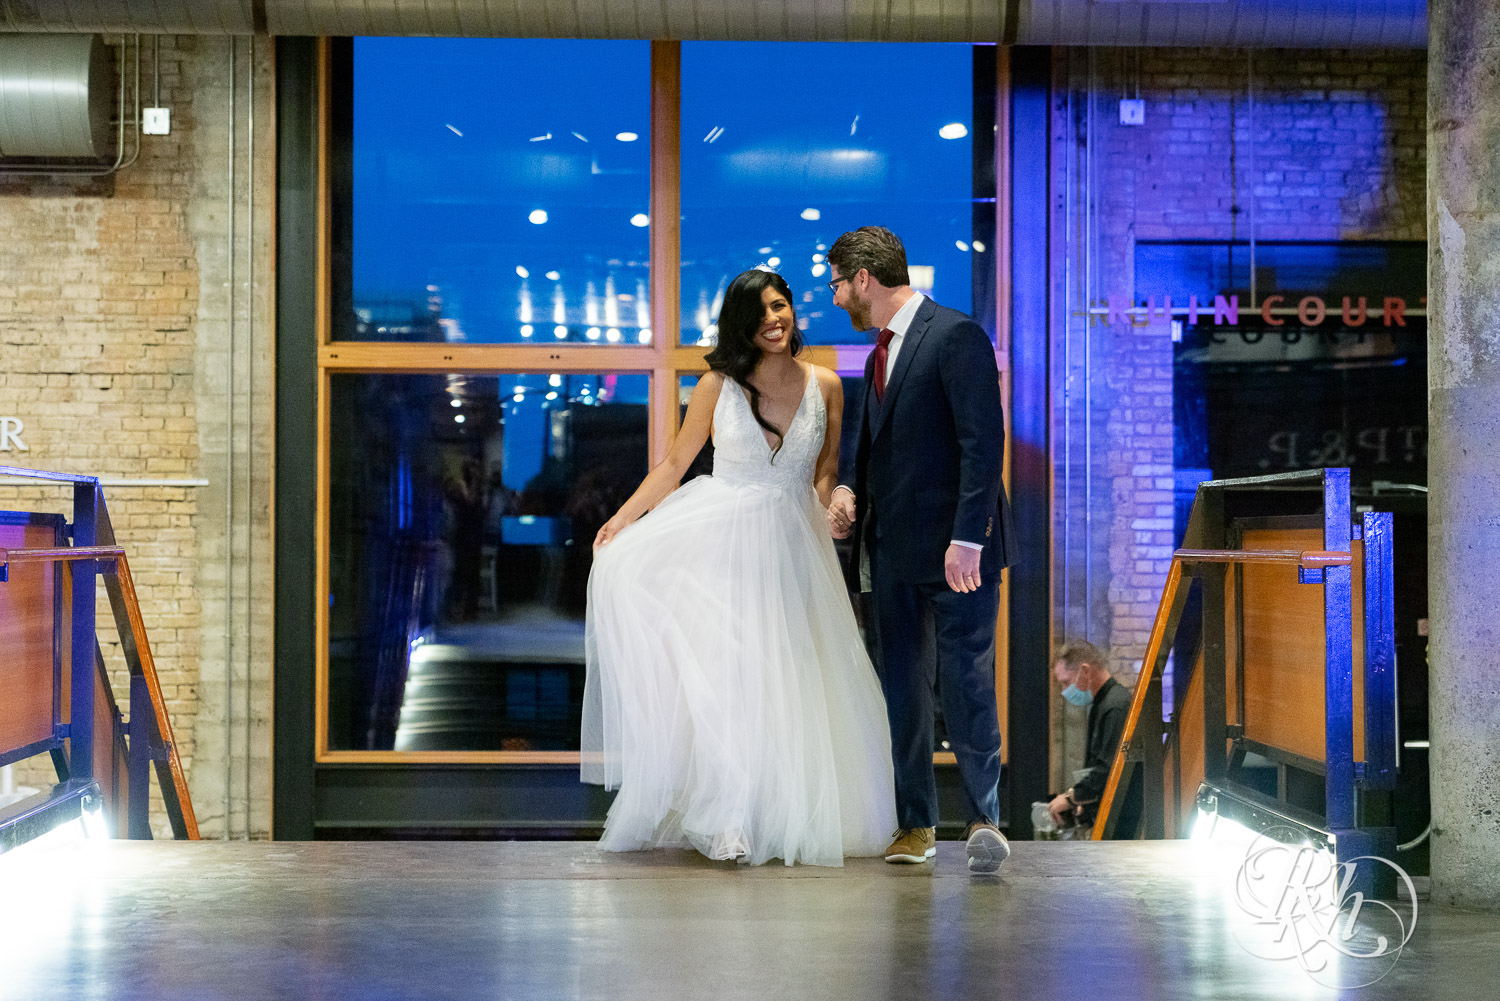 Bride and groom doing grand entrance at wedding reception in Mill City Museum in Minneapolis, Minnesota.